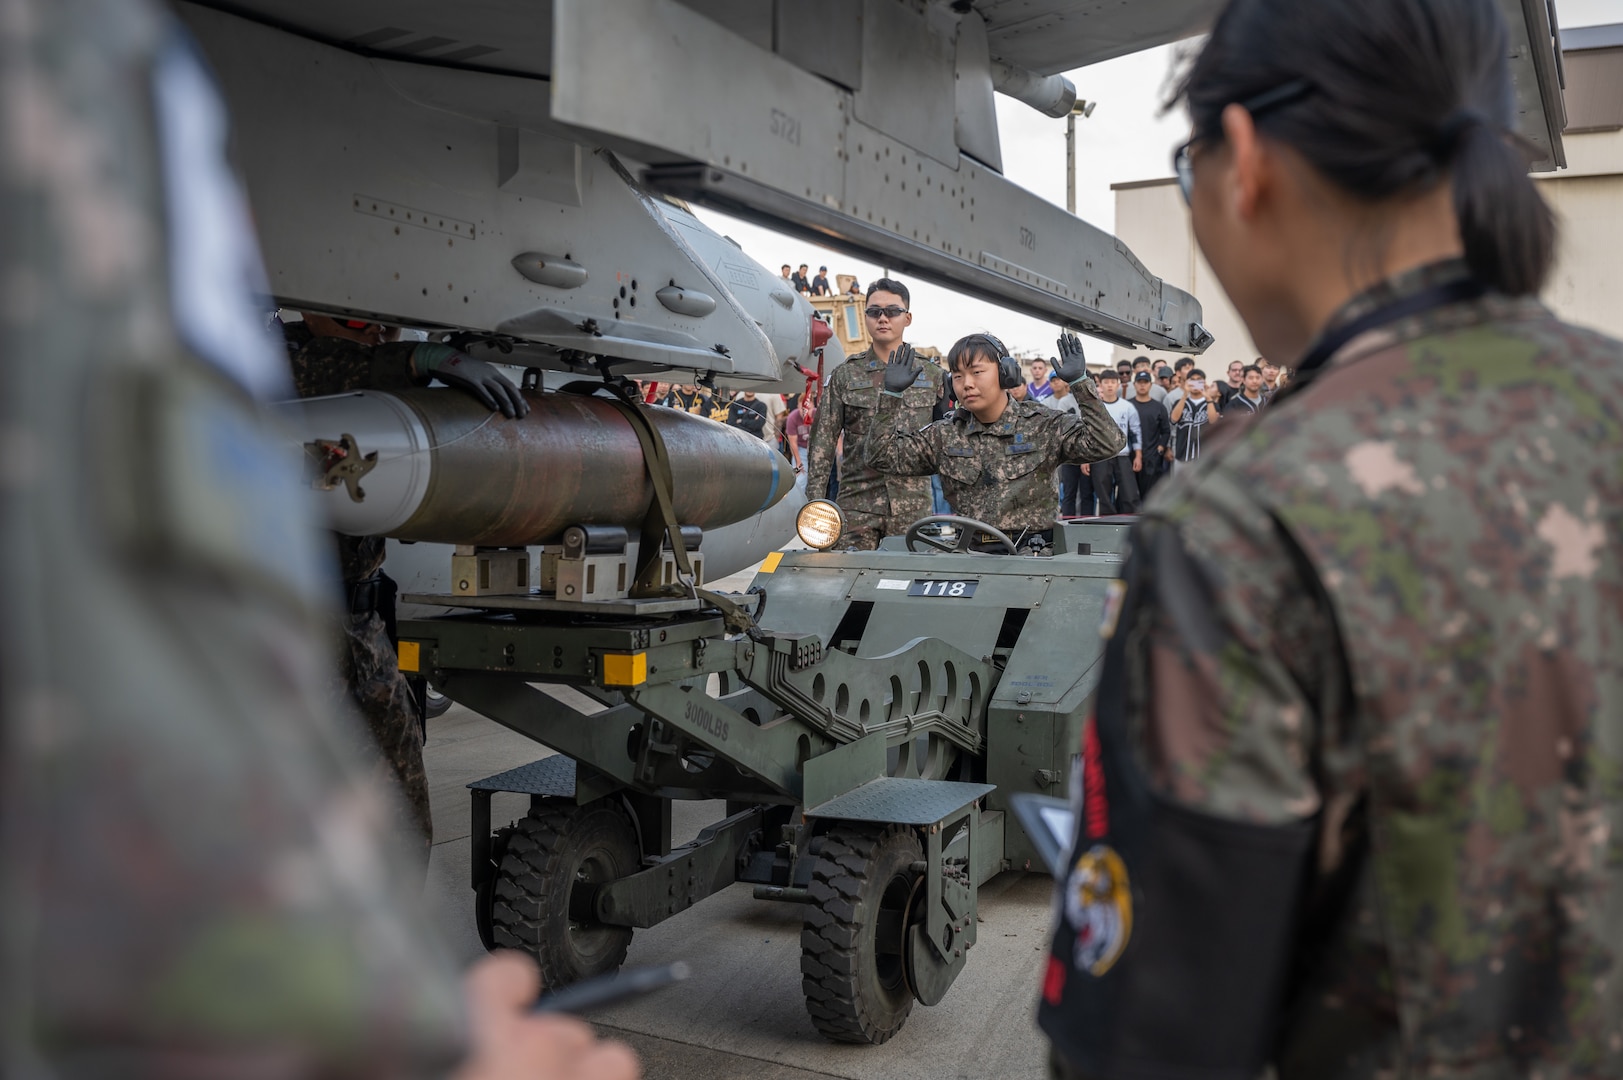 A load crew member, ensures the munition loading vehicle remains steady as his teammates coordinate the position of a munition during Pen Fest, the annual bilateral munitions load crew competition at Kunsan Air Base